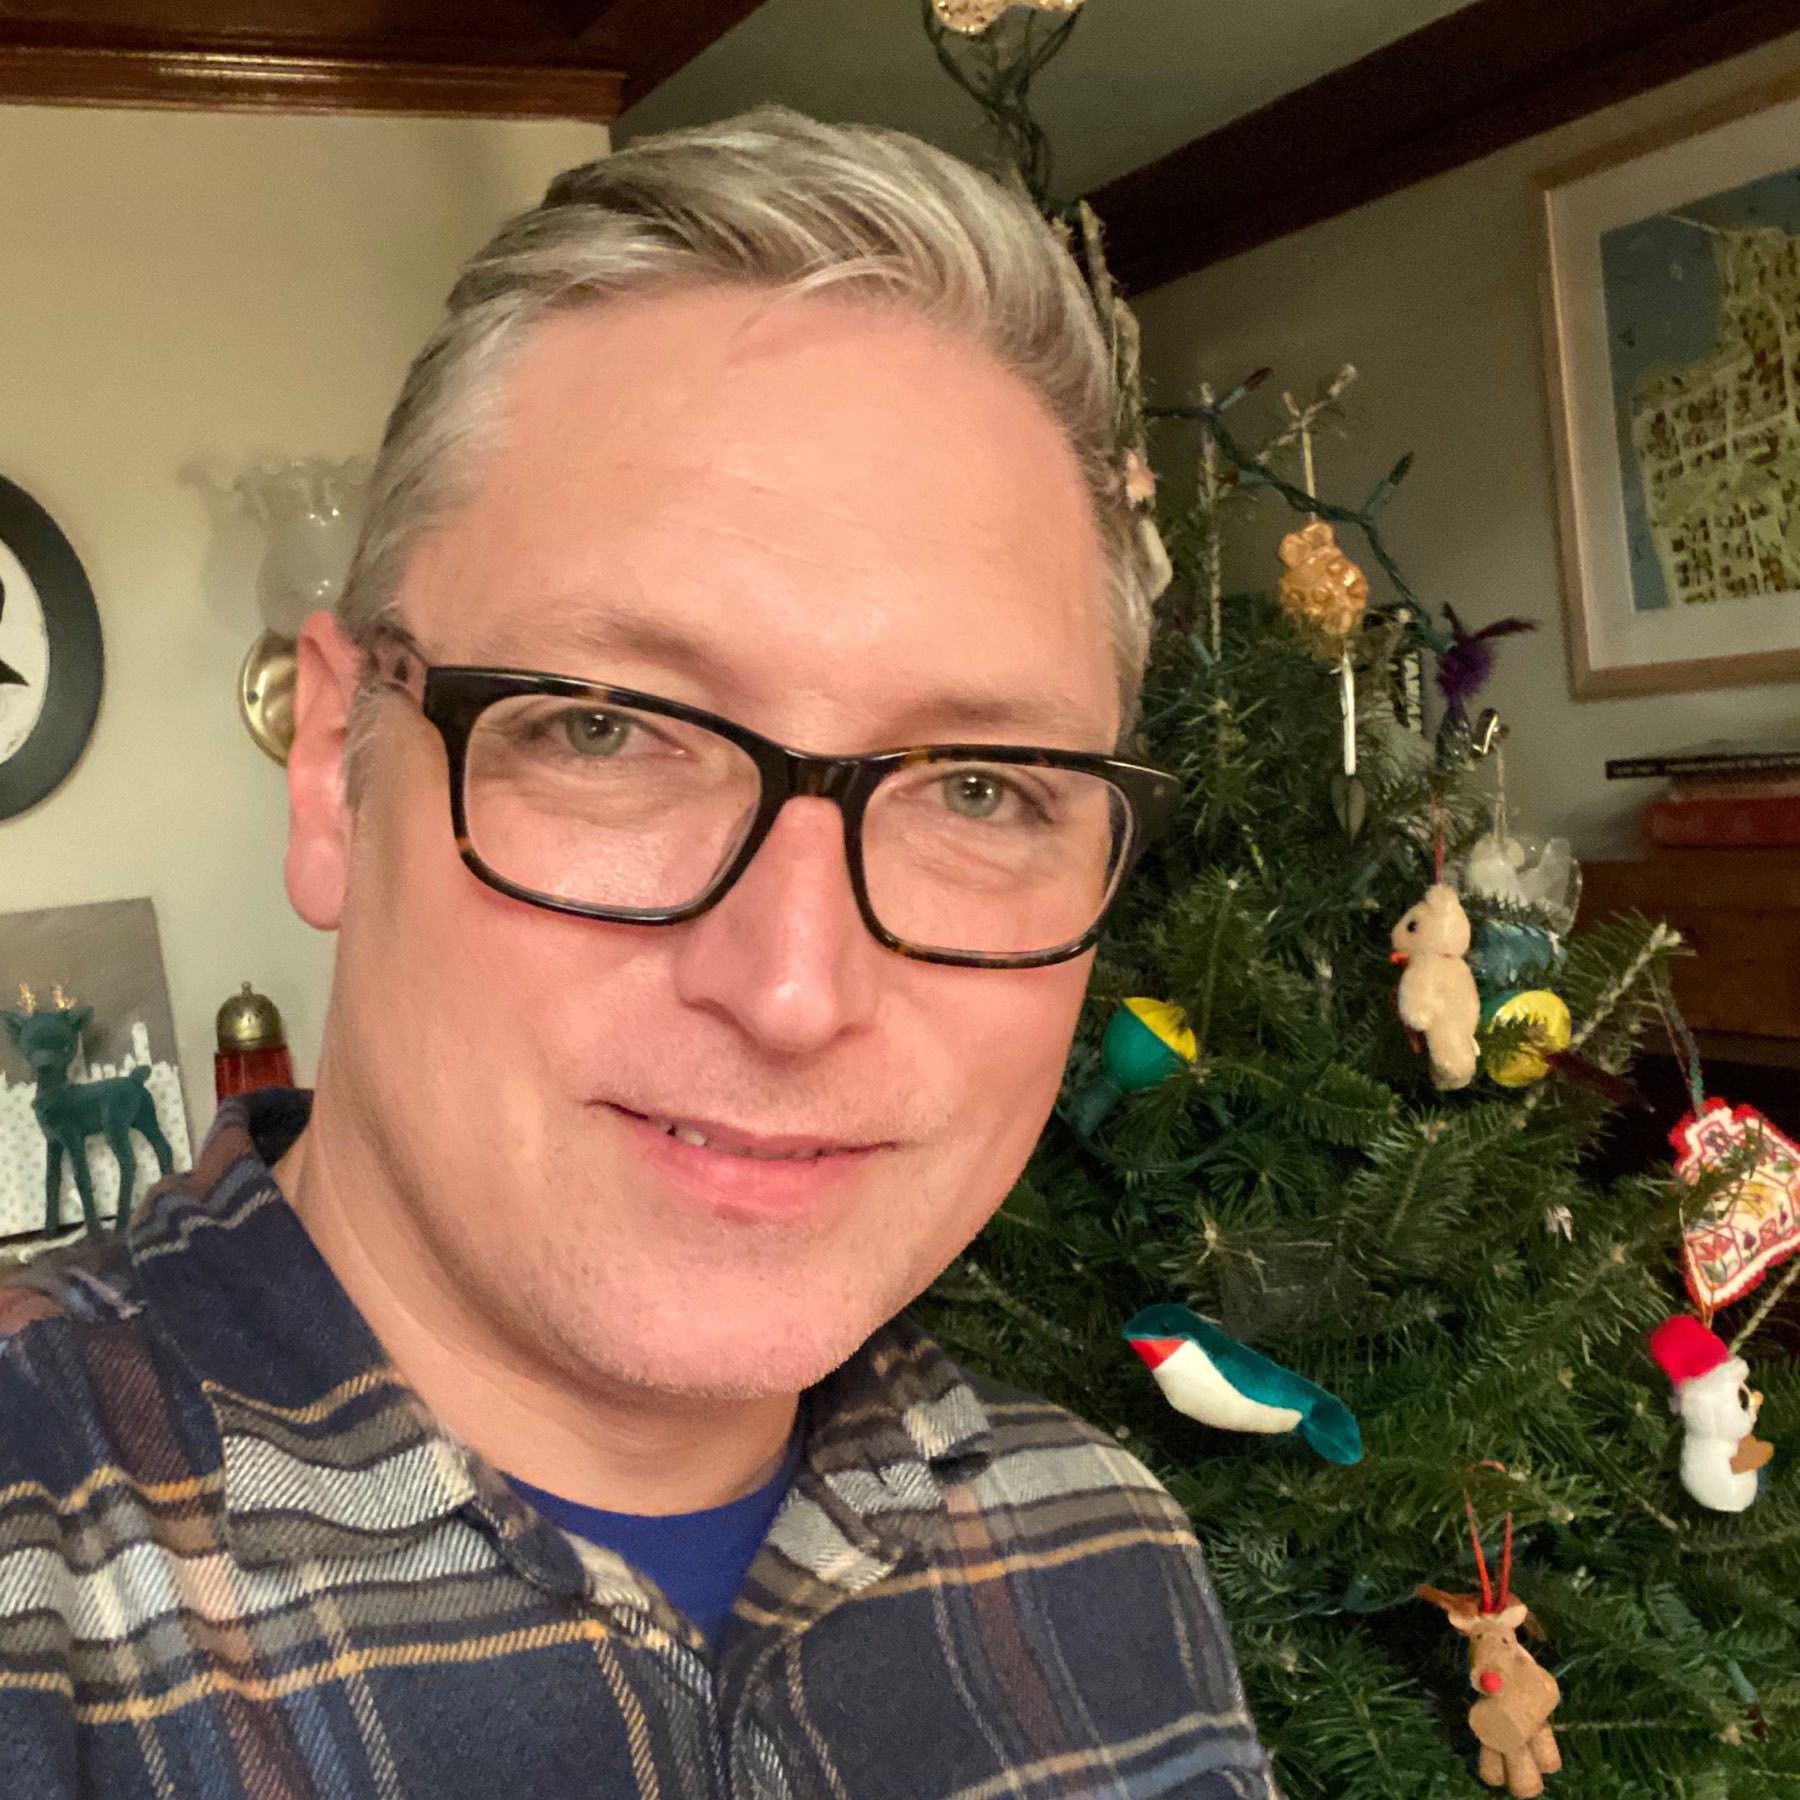 self portrait, caucasian male with glasses and graying hair, backdrop of unlit christmas tree